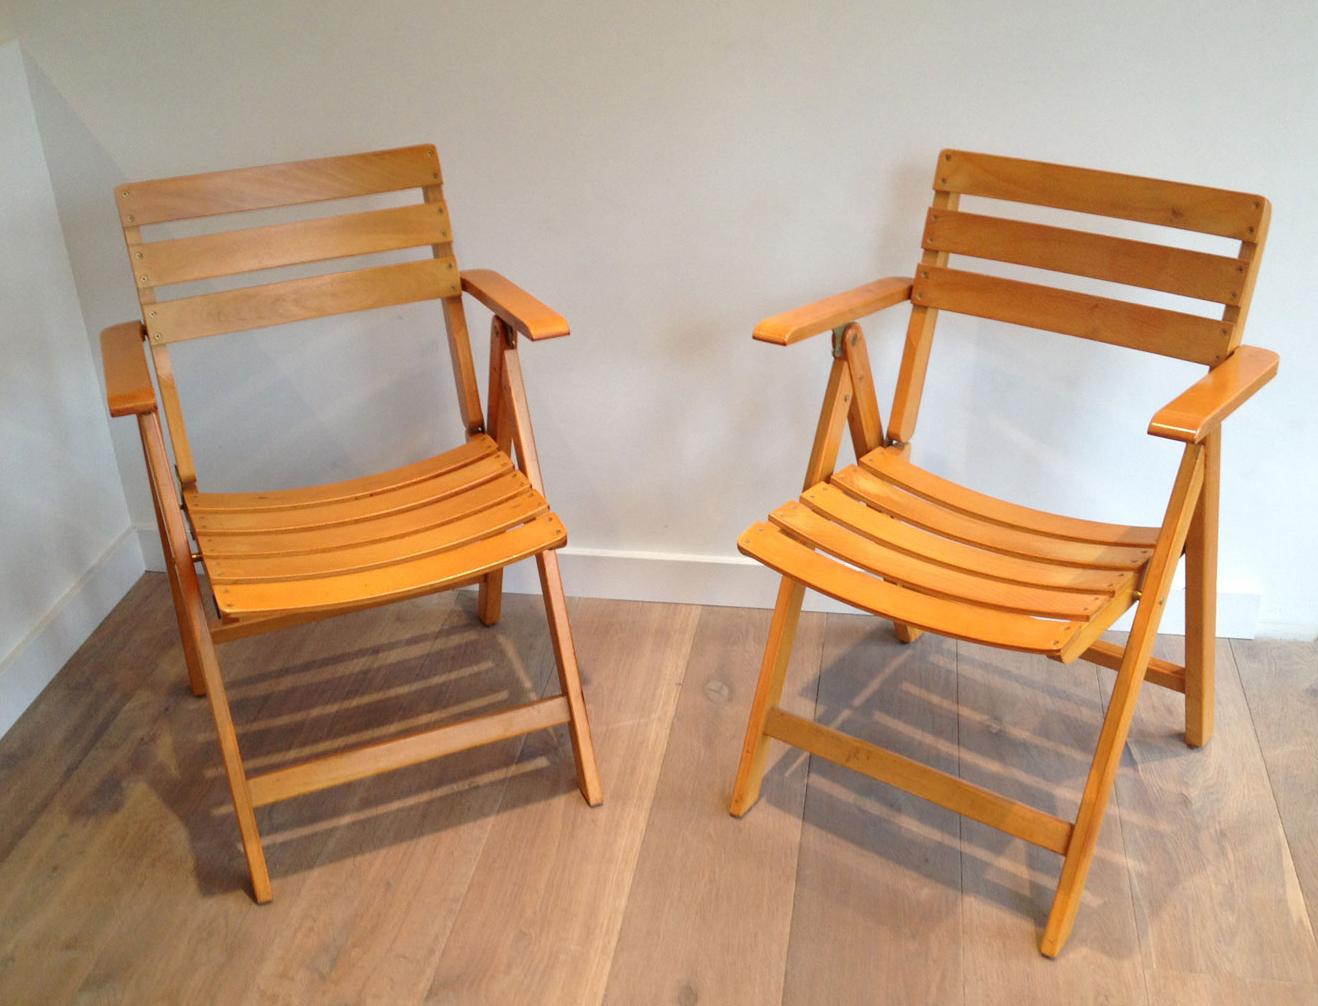 Pair of Wooden Armchairs, French Work Signed Clairitex, Circa 1970 For Sale 5